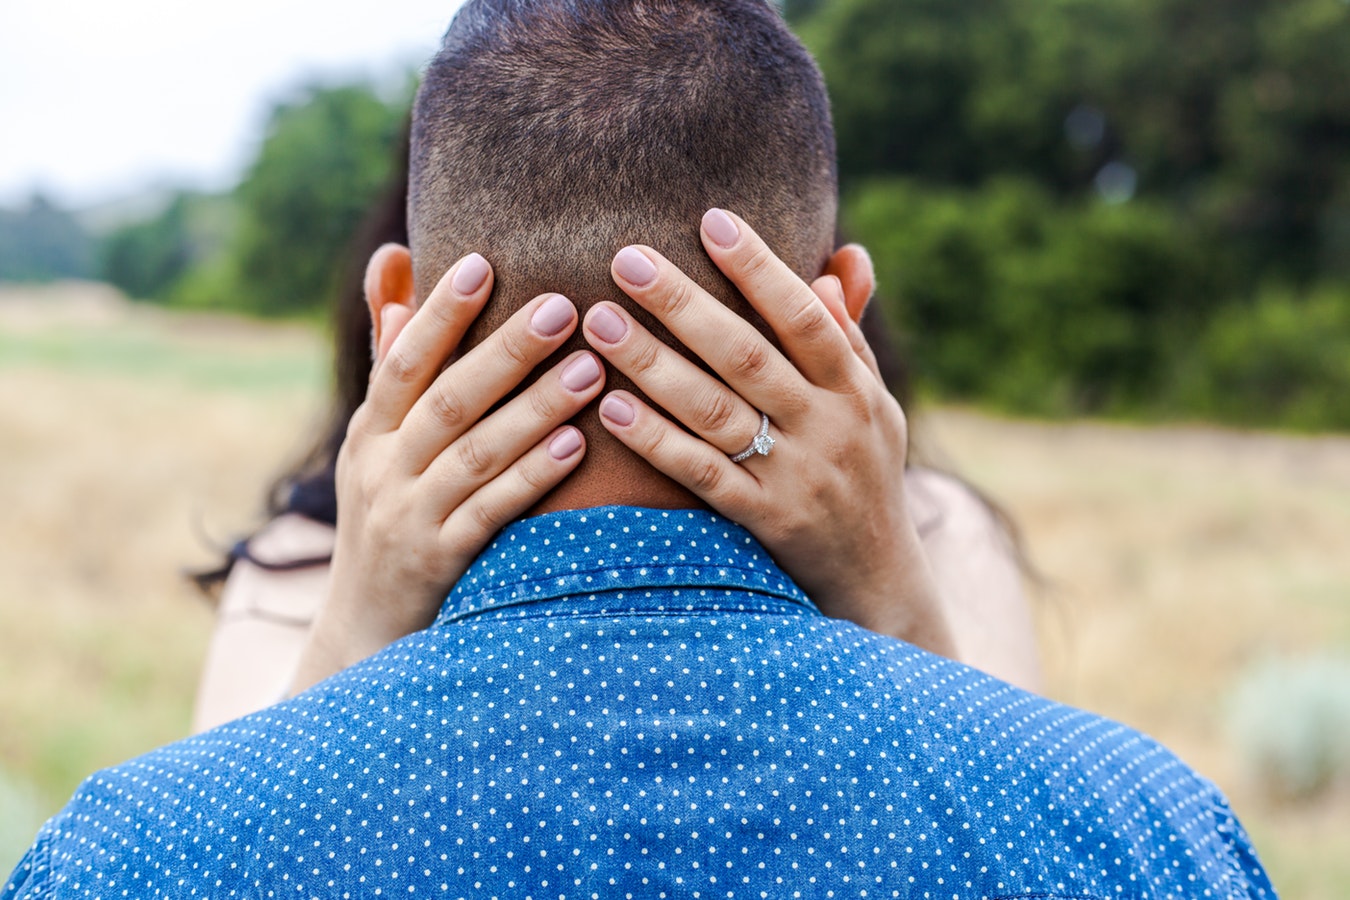 Woman’s hands on back of man’s head featuring her diamond engagement ring.